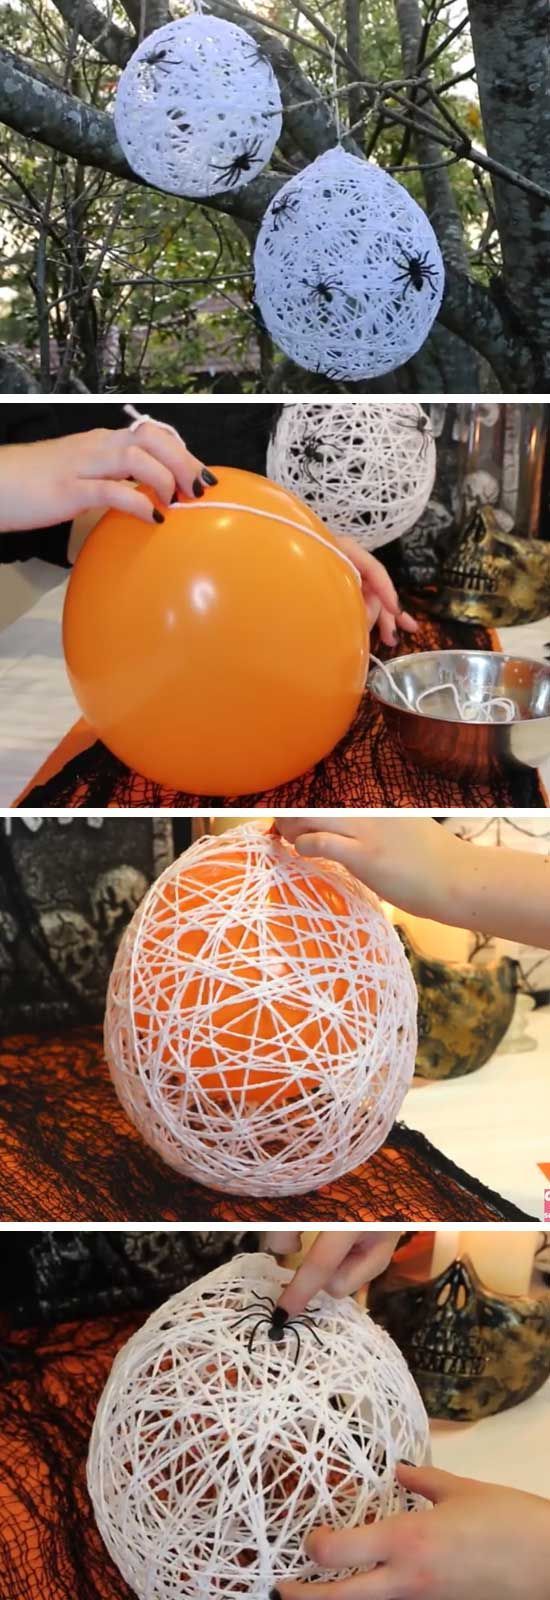 How to Make Super Fun Halloween Crafts for Kids - Spider Nests